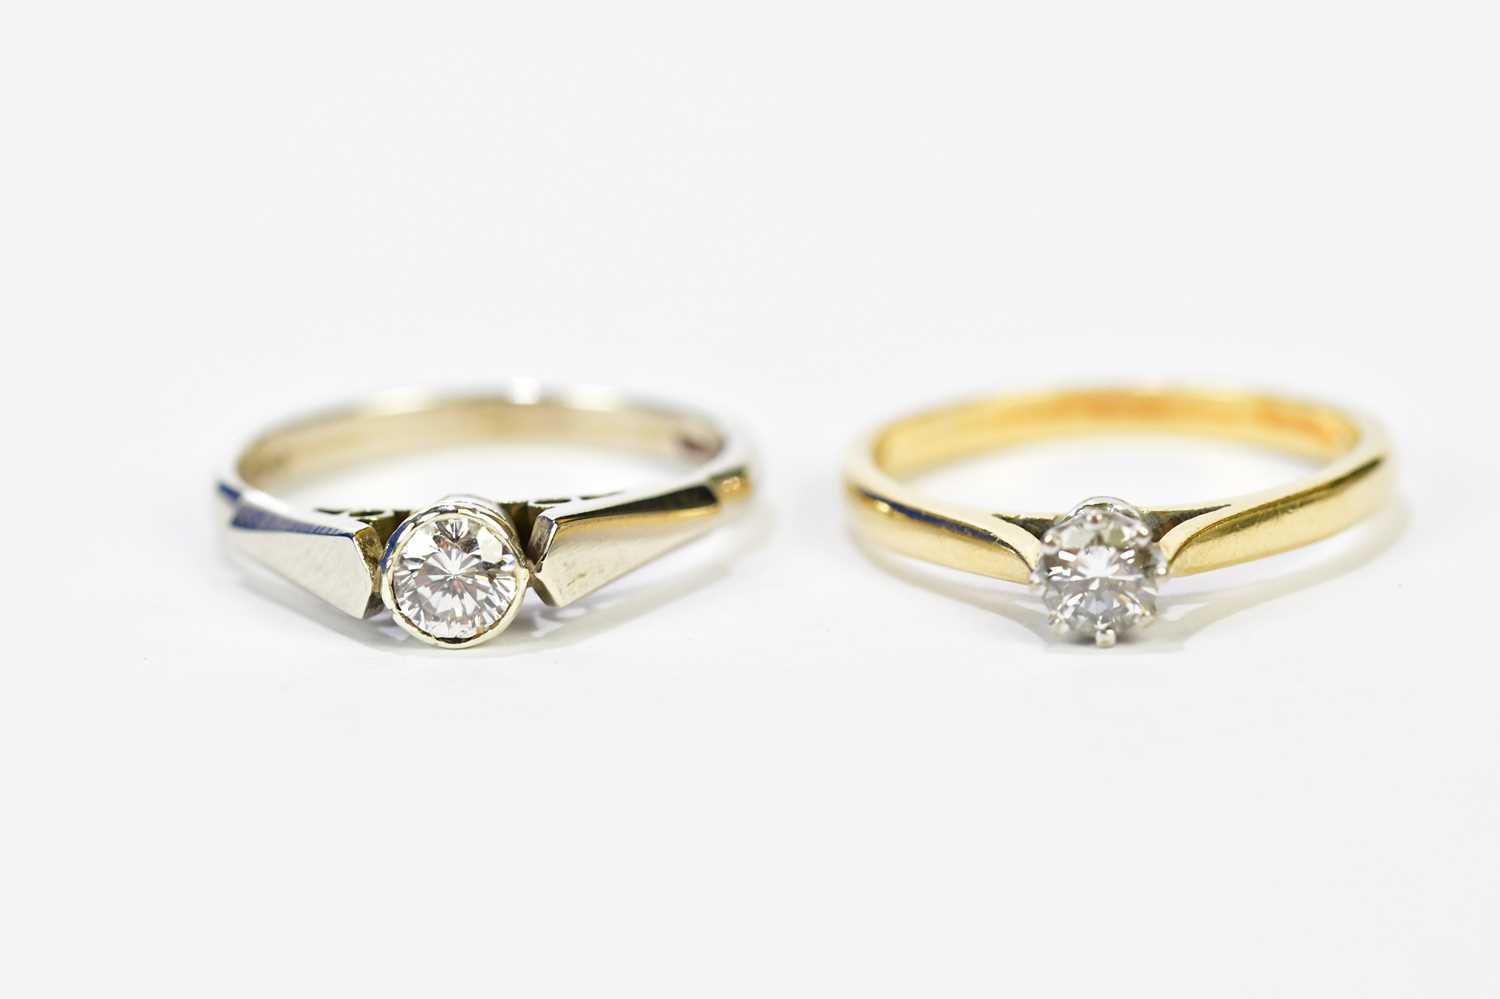 Two 9ct yellow gold diamond solitaire rings, one claw set, the other collet set, stones approx. 0.15